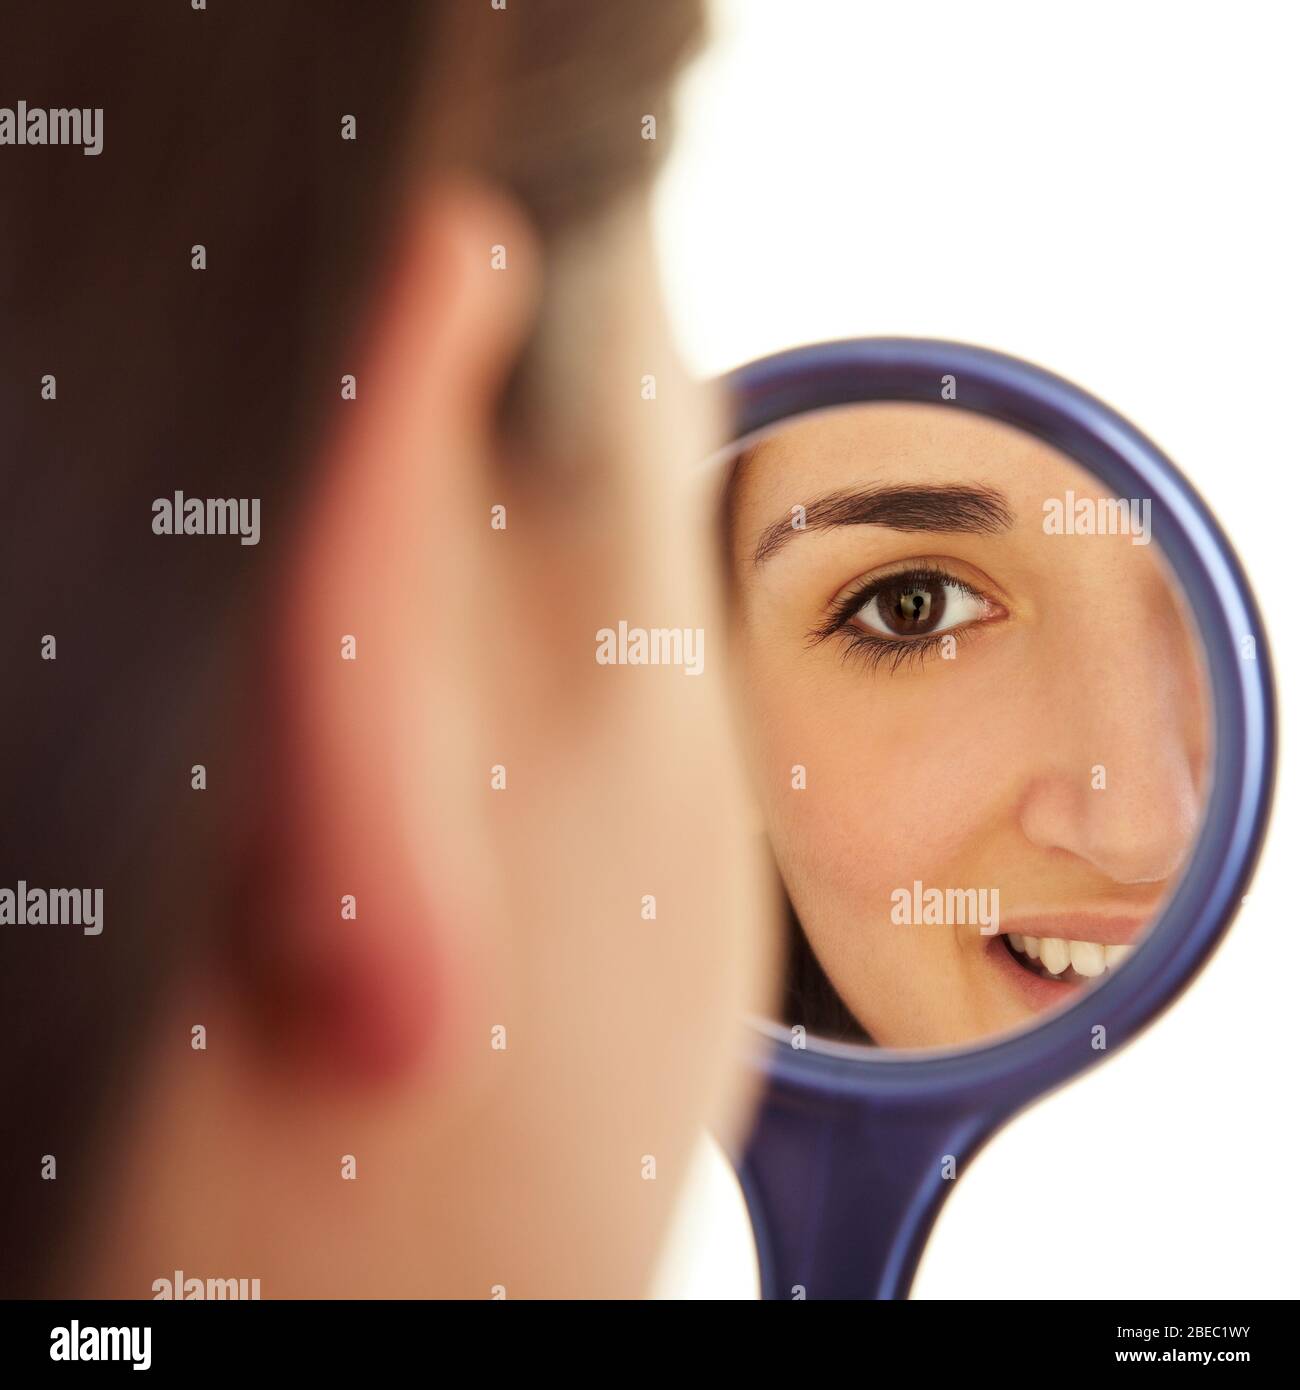 Young woman looks into a round hand mirror Stock Photo